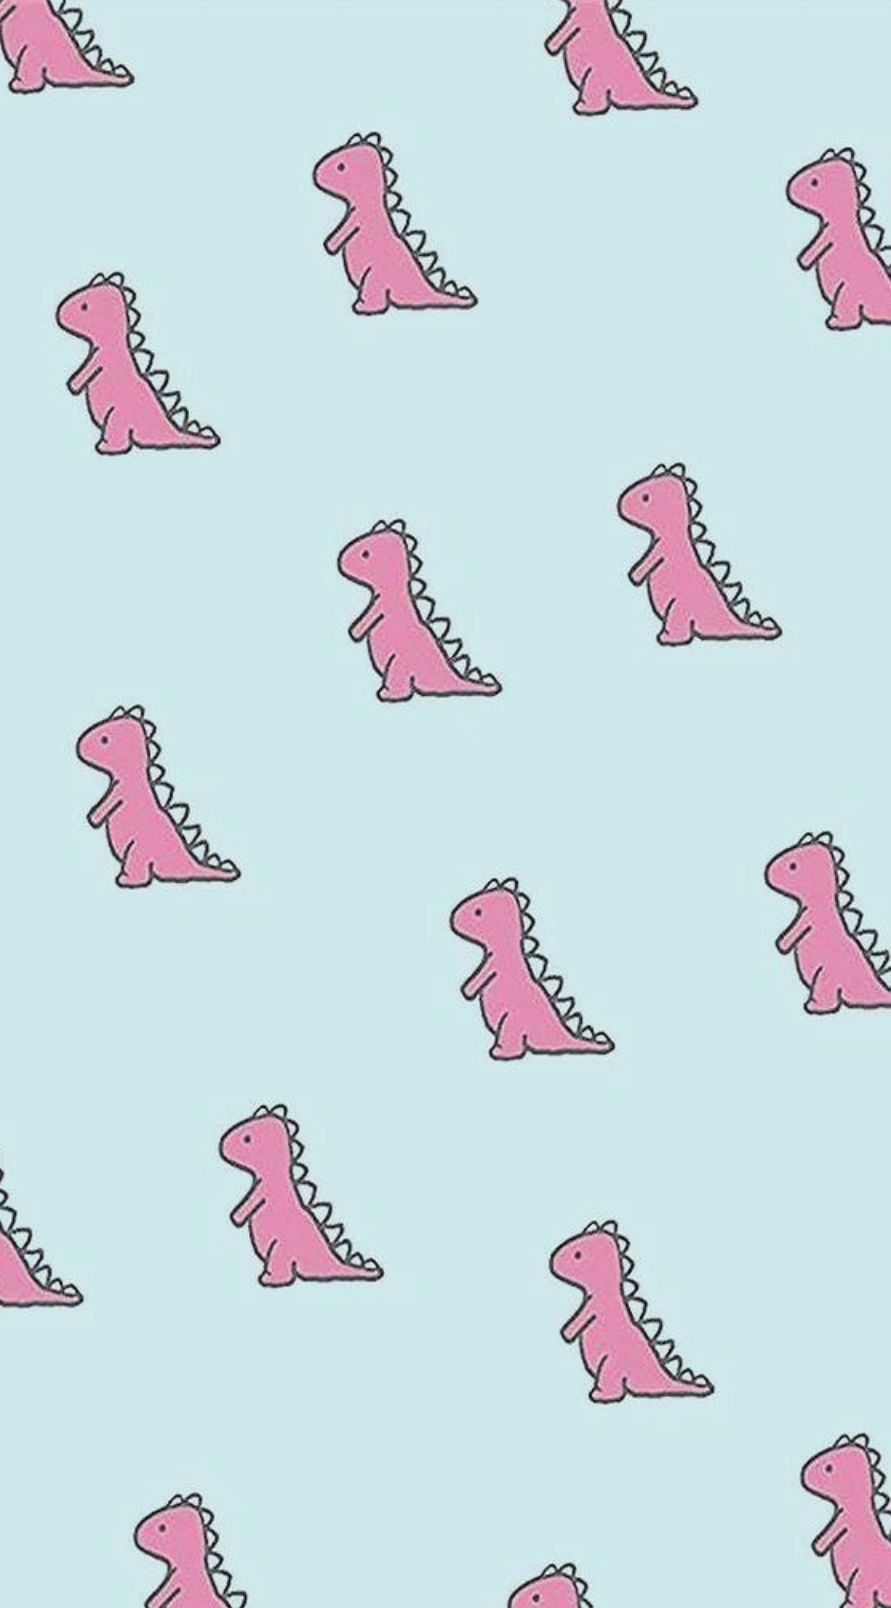 A pattern of pink dinosaurs on blue background - Dinosaur